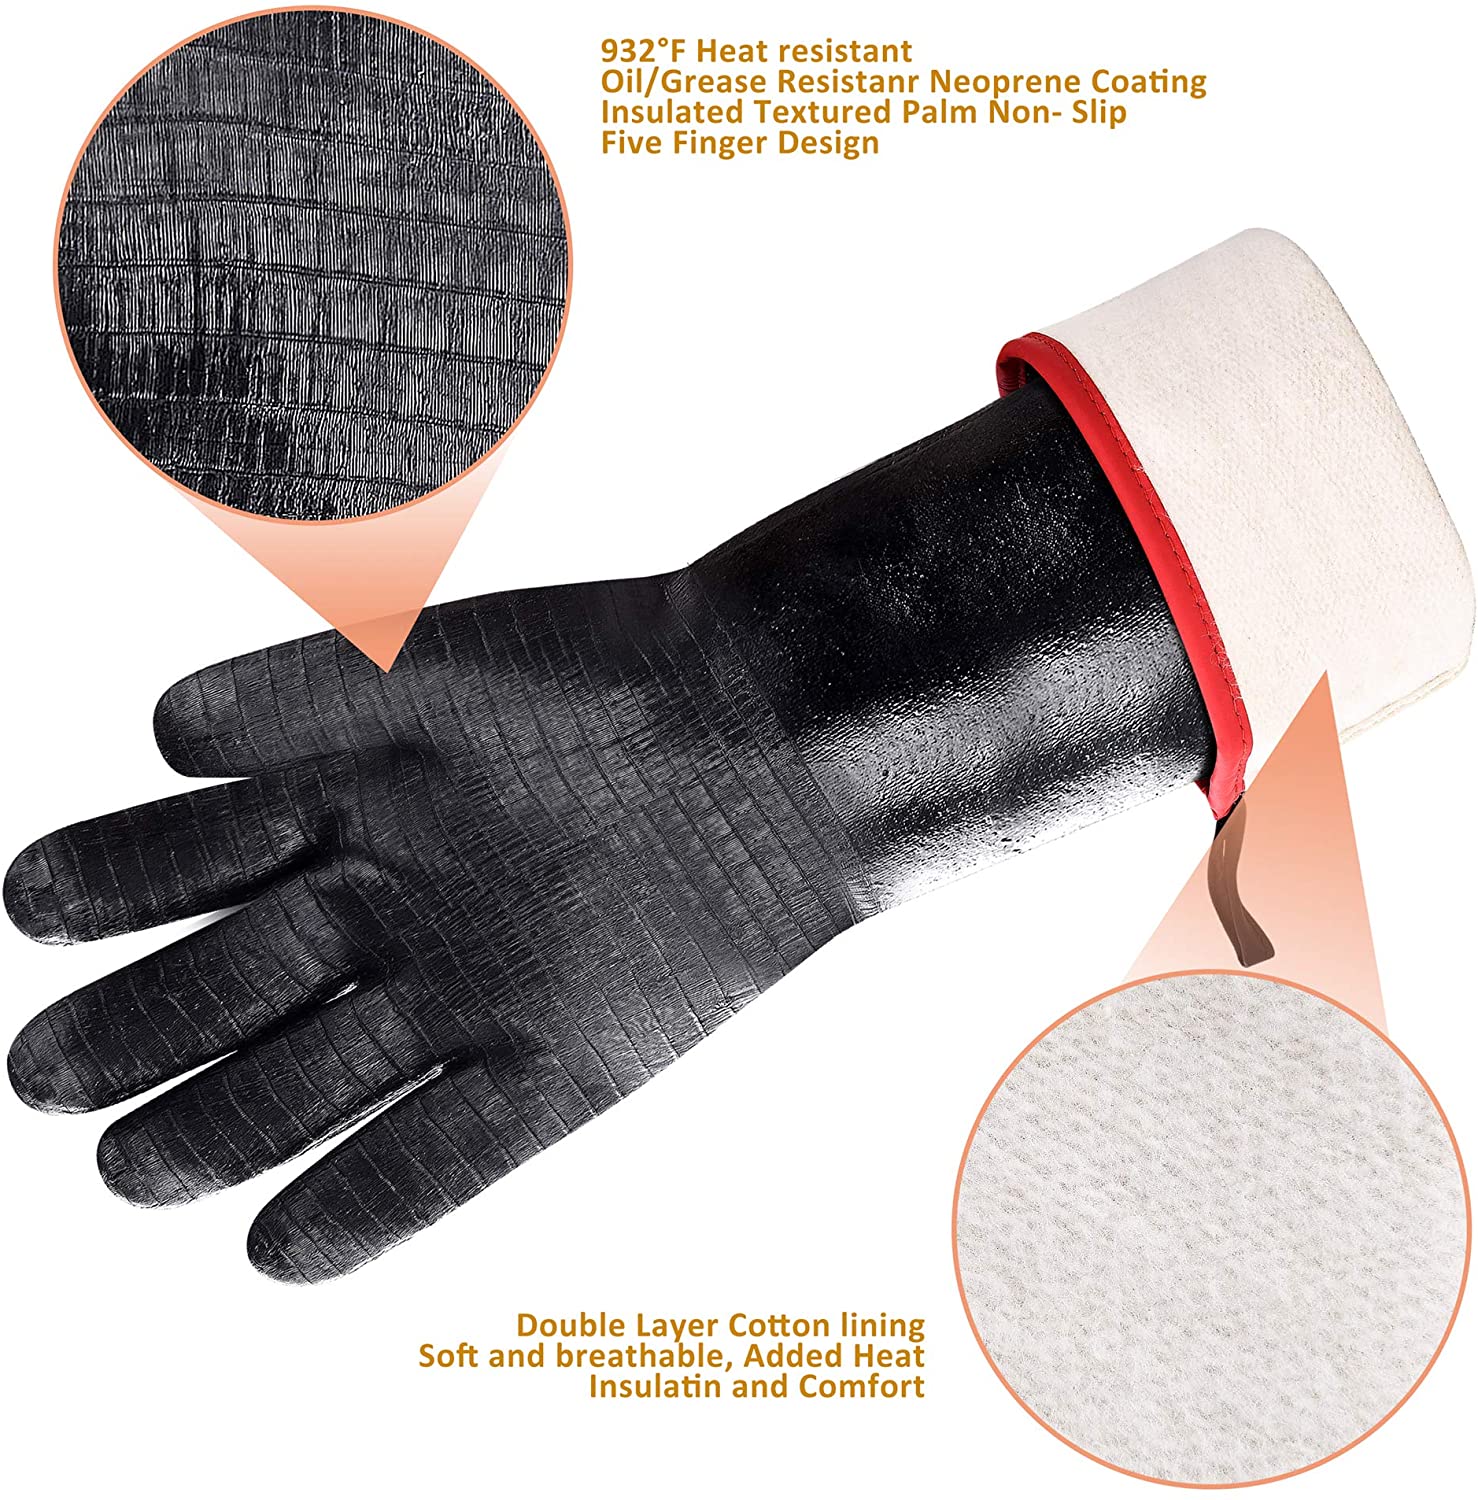 Heat Resistant-Smoker BBQ Gloves 18 Inches,932℉, Grill, Cooking Barbecue Gloves, to Handling Heat Food Right on Your Fryer,Grill,Oven. Waterproof, Fireproof, Oil Resistant Neoprene Coating - image 3 of 7